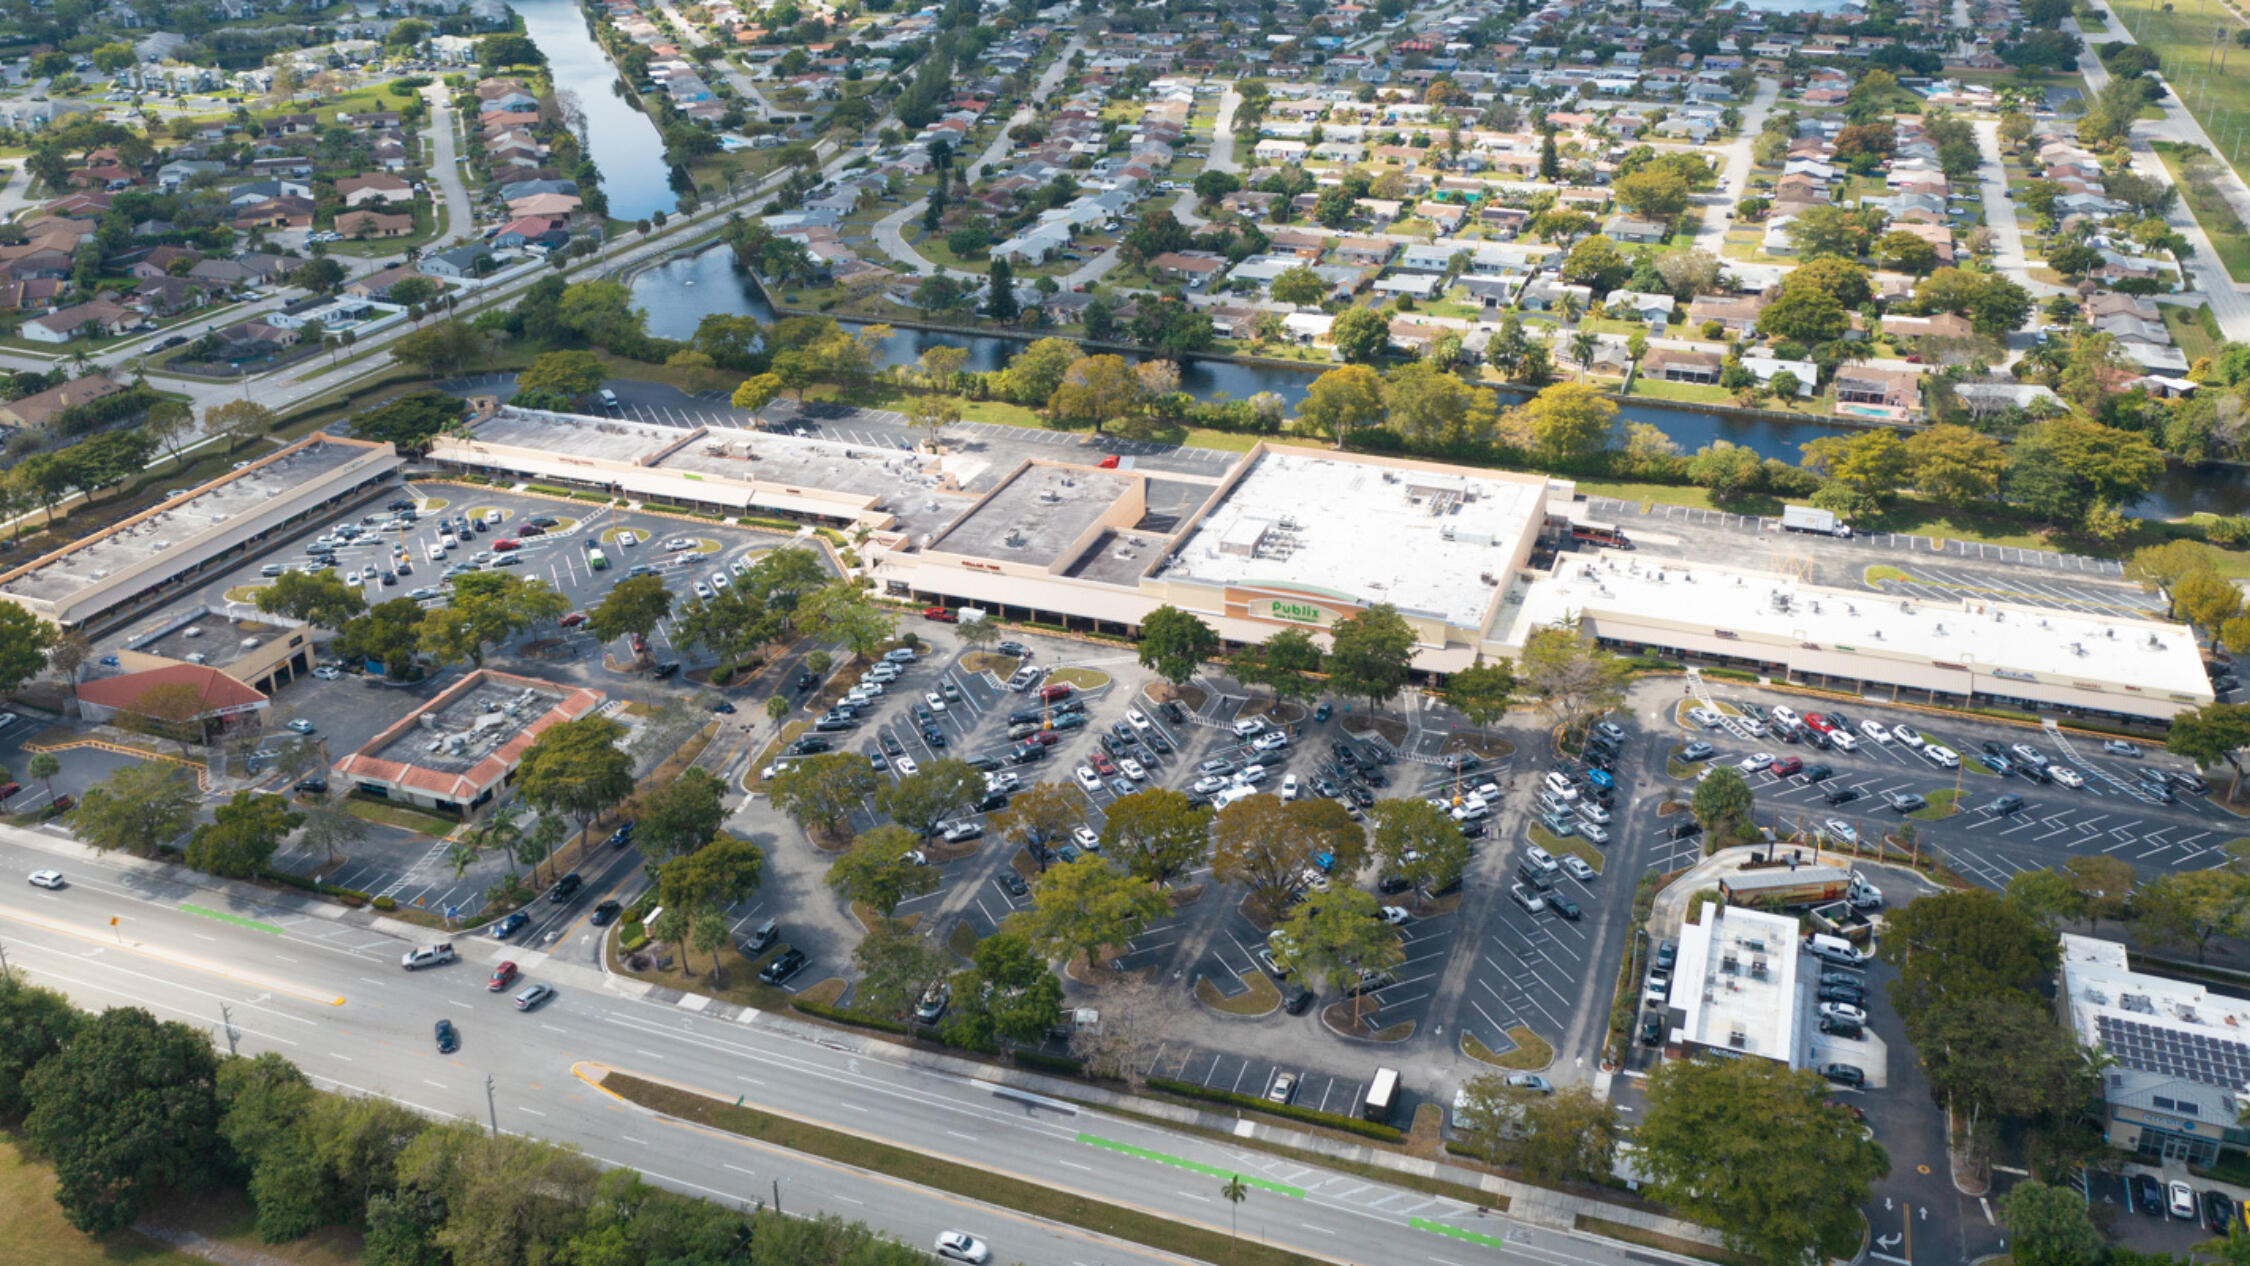 Aerial view of Tamarac Town Square including main road in front and neighborhood in background